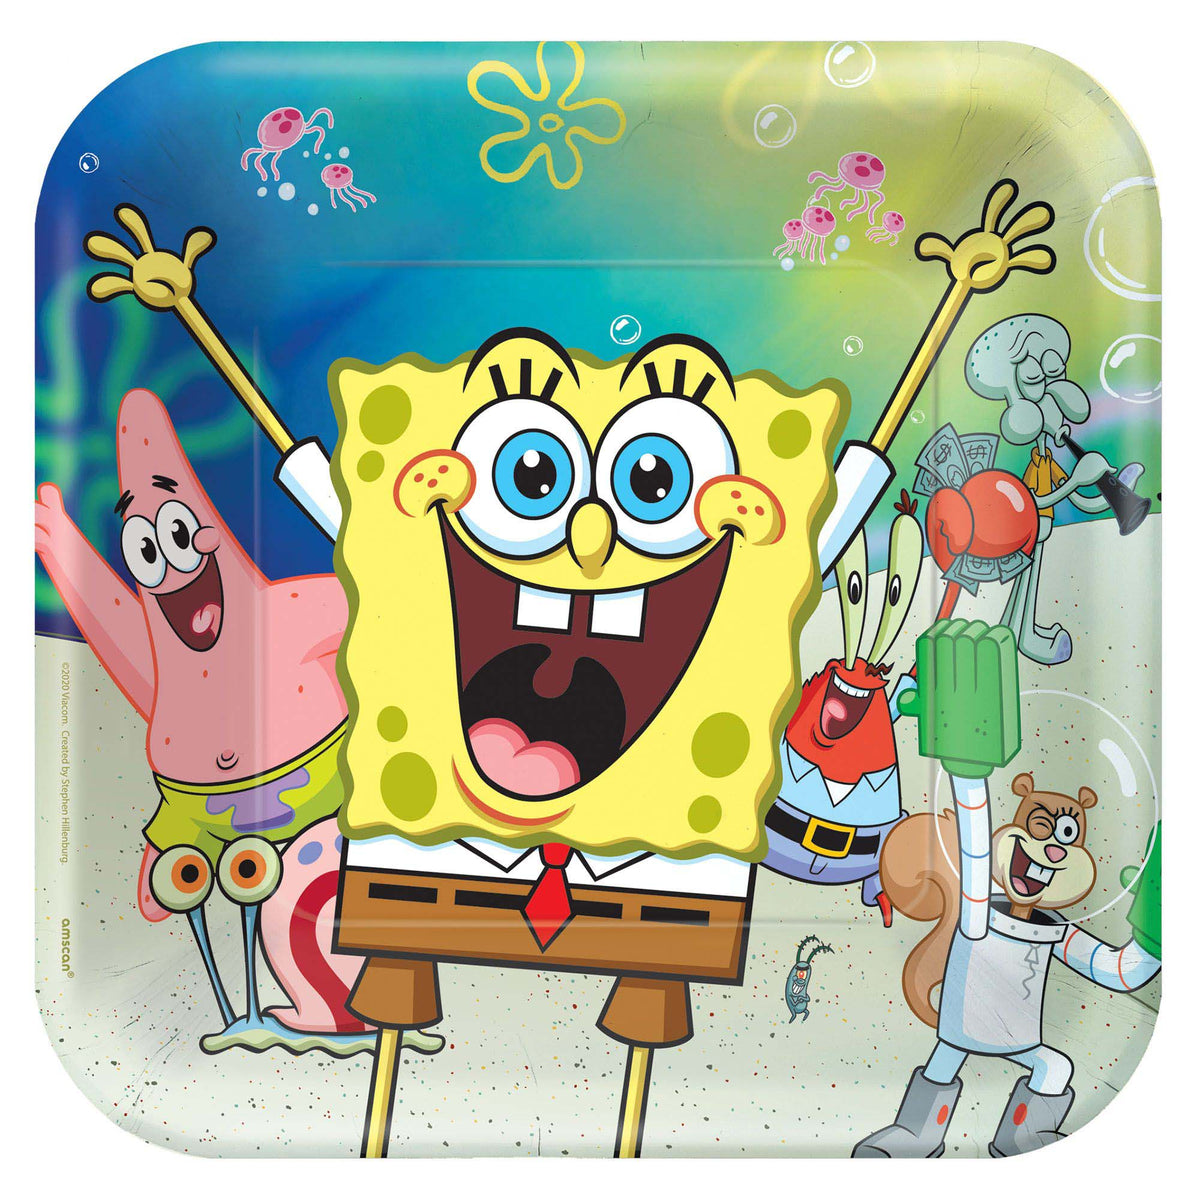 AMSCAN CA Kids Birthday SpongeBob SquarePants Birthday Large Square Lunch Paper Plates, 9 Inches, 8 Count